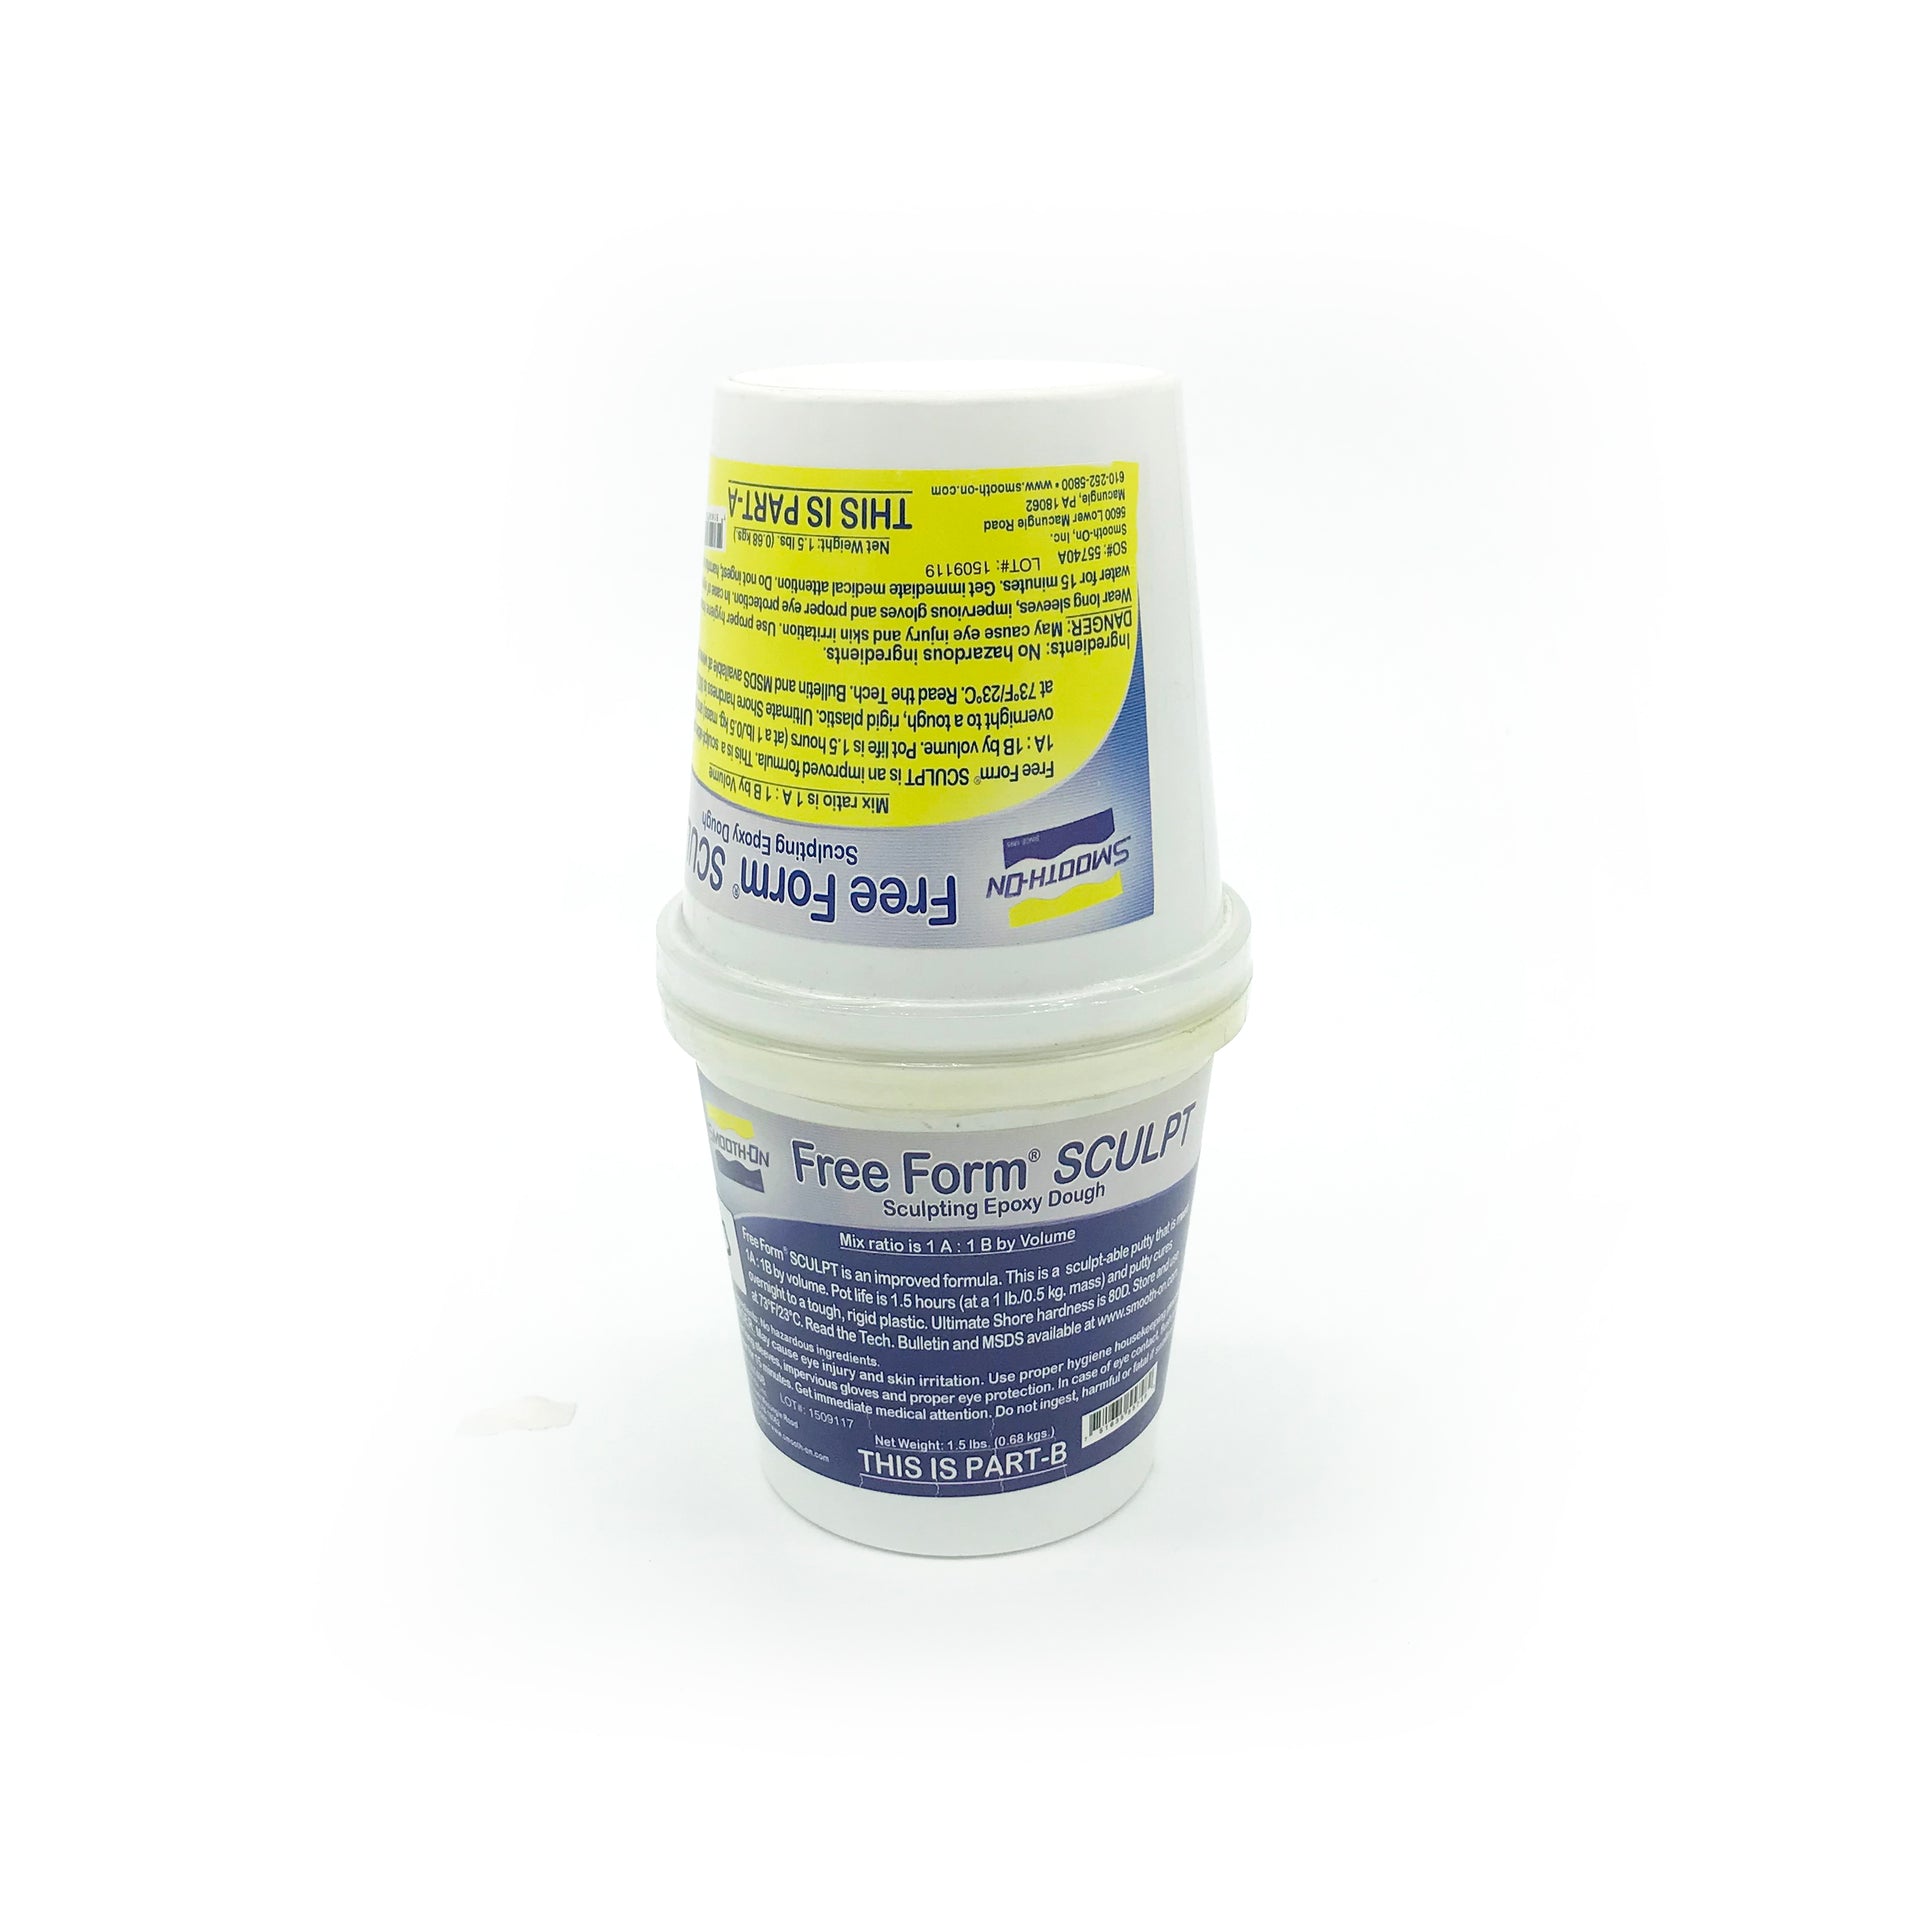 Free Form Sculpt Epoxy Putty - Trial Size Smooth-On